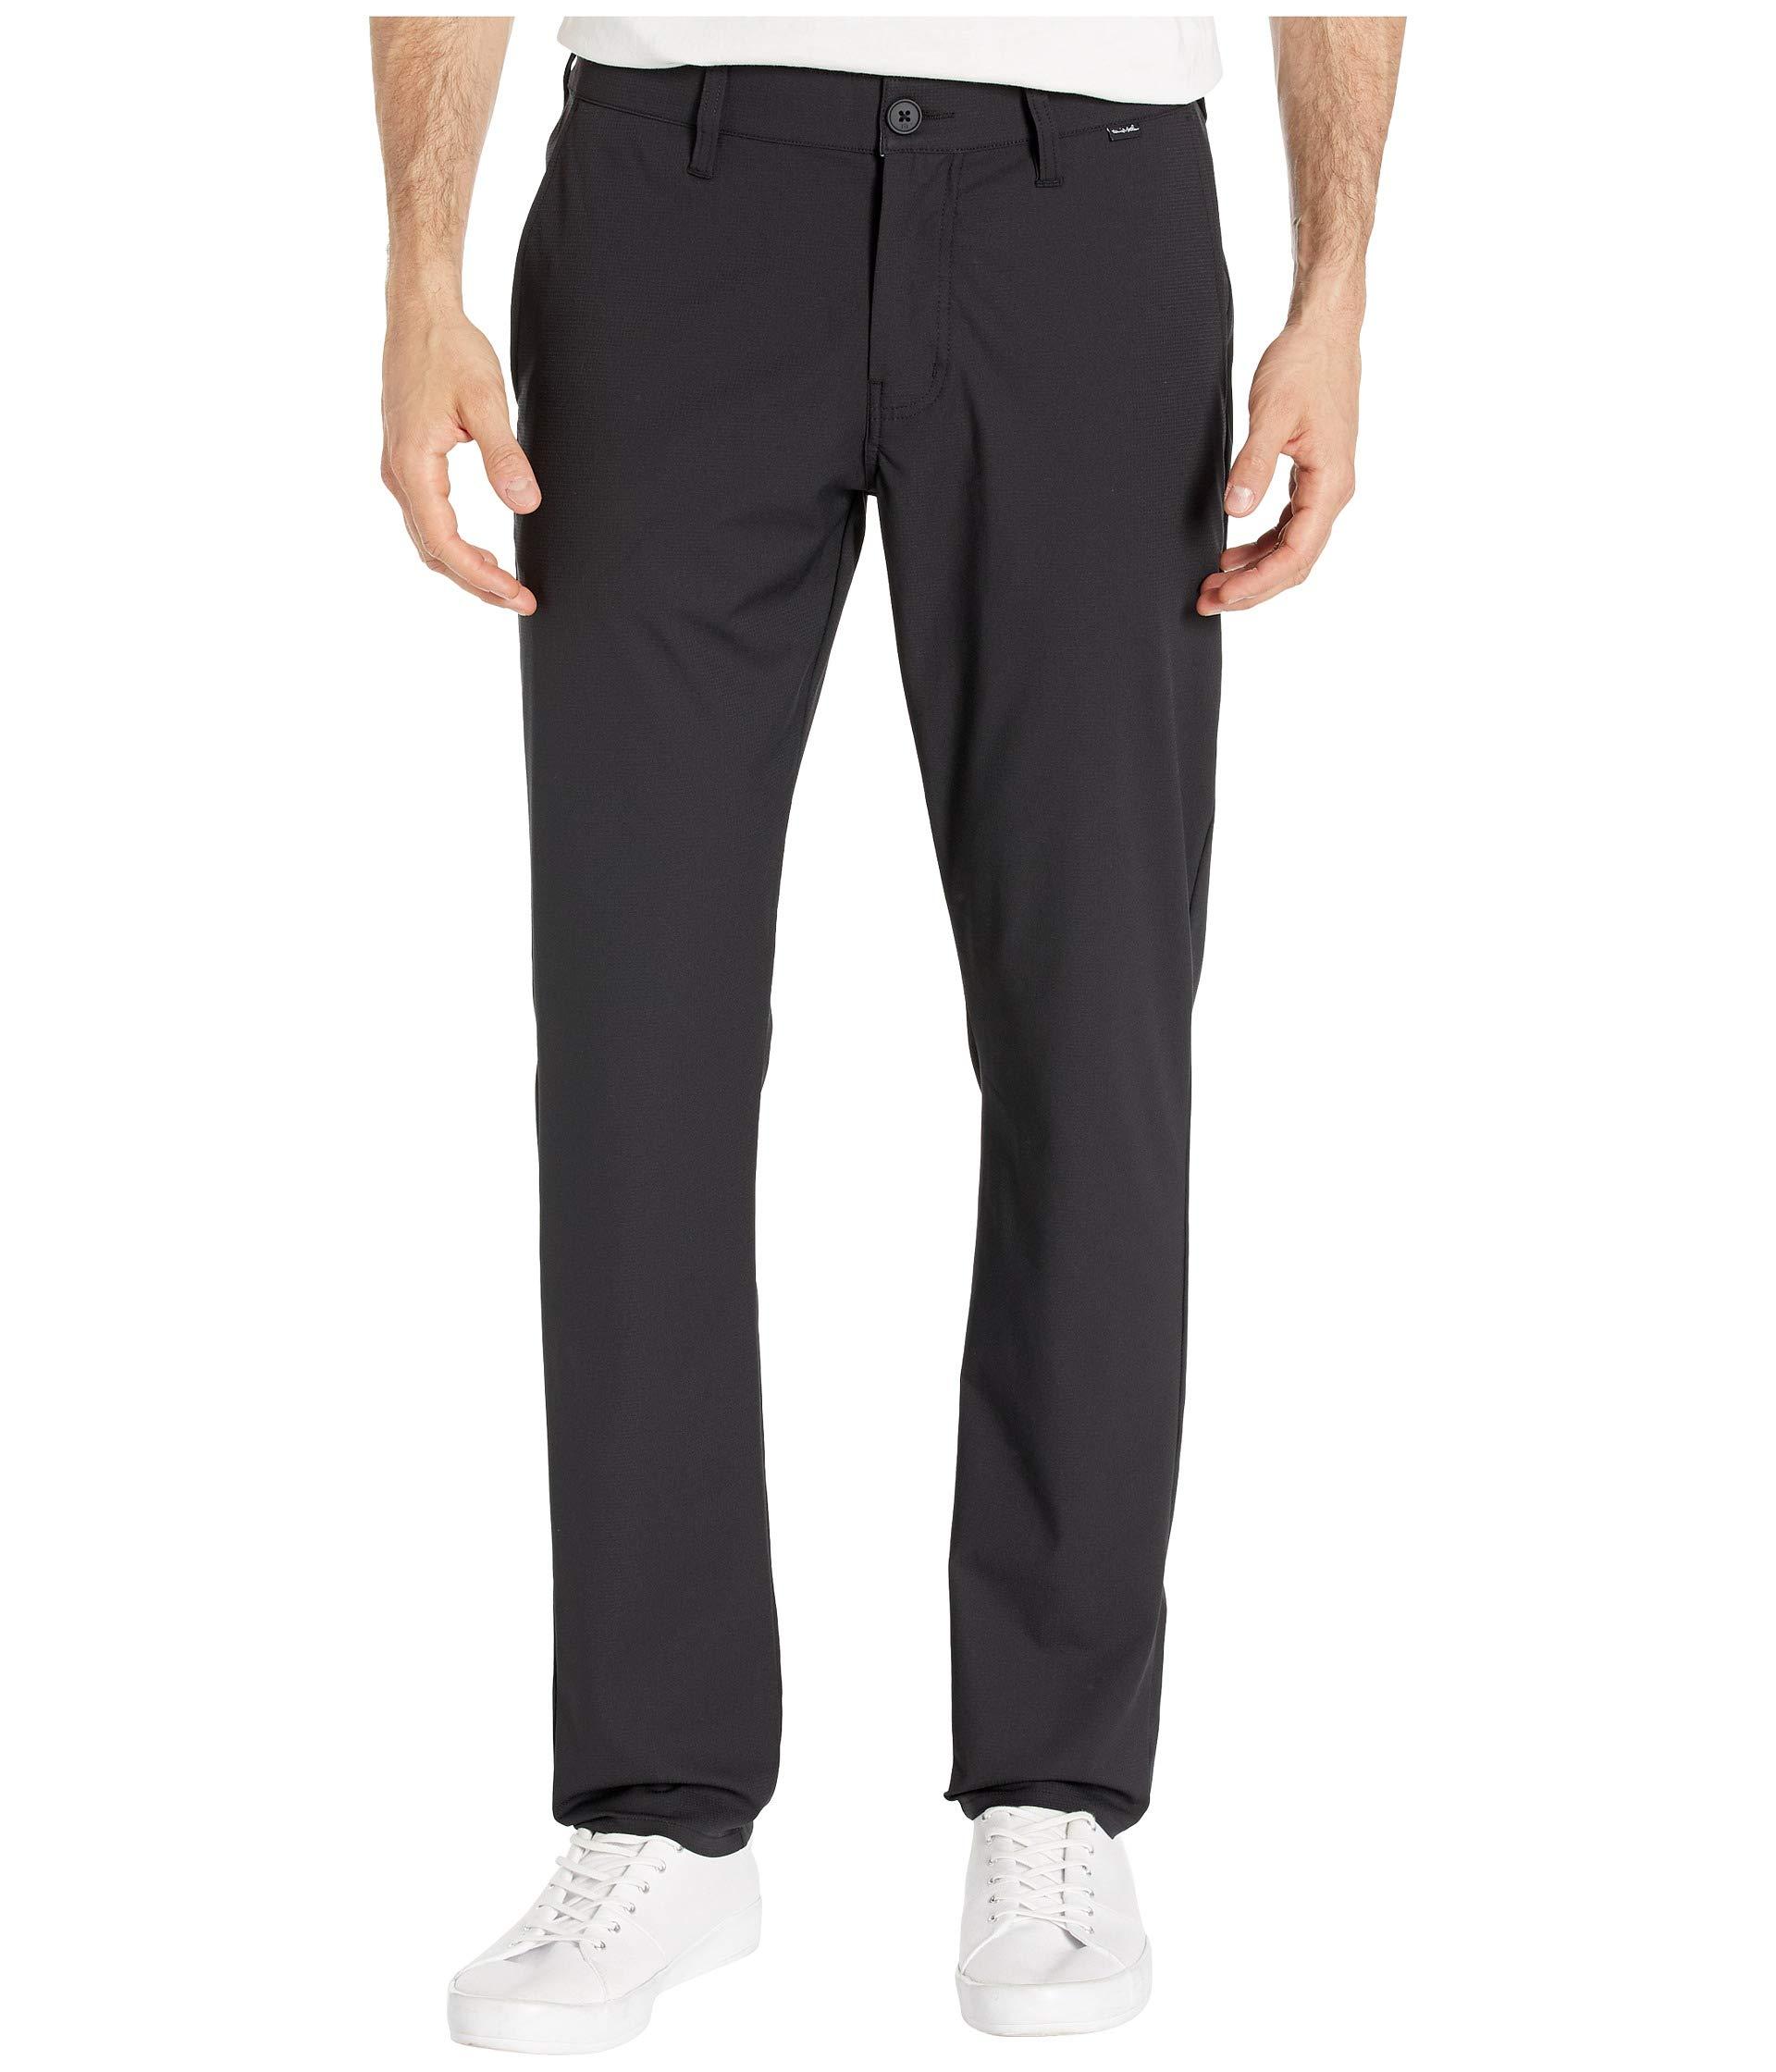 Travis Mathew Synthetic Right On Time Pants in Black for Men - Lyst